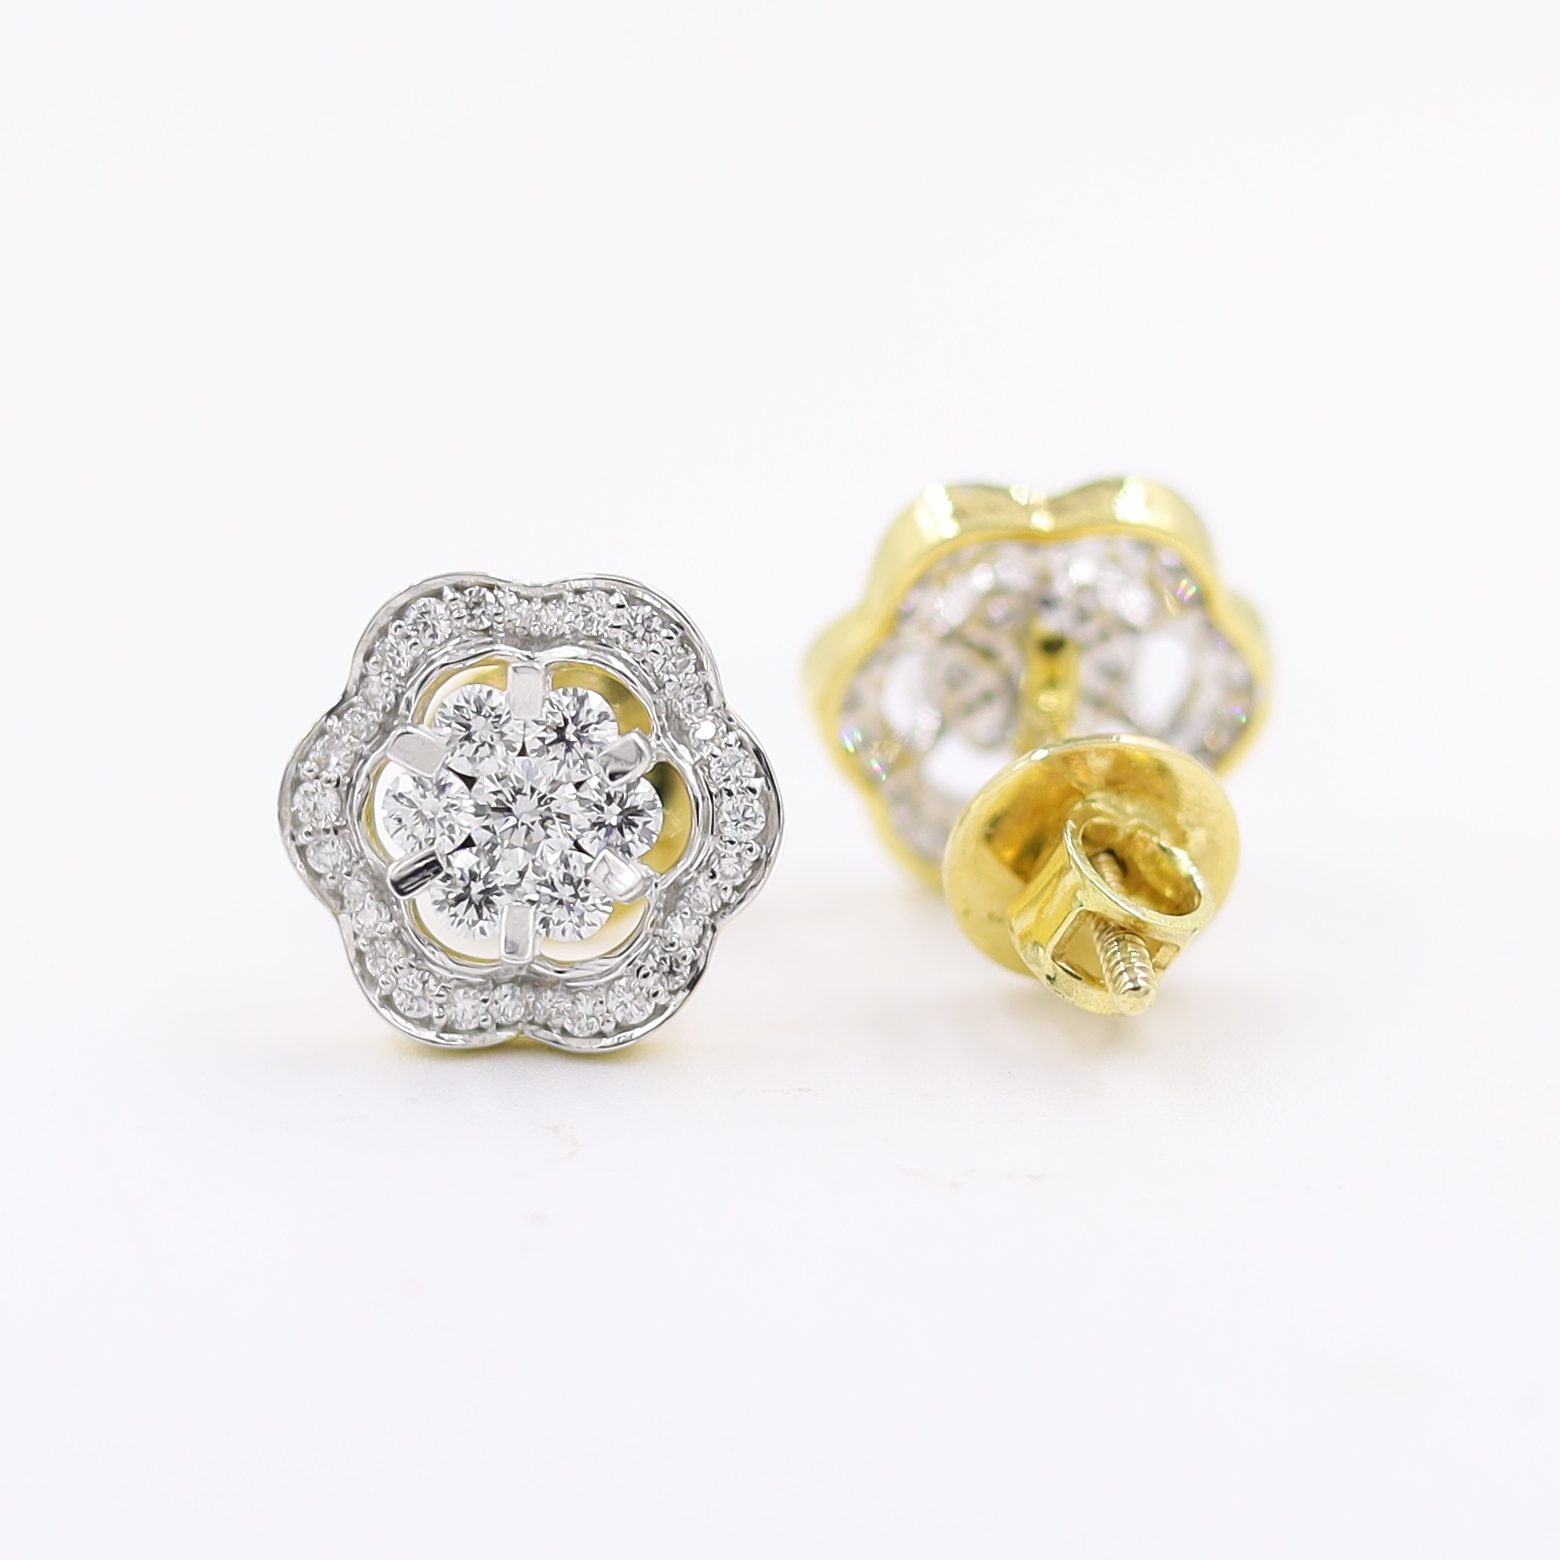 14kt Ethereal Floral Earrings topped with a round pressure-set diamond.